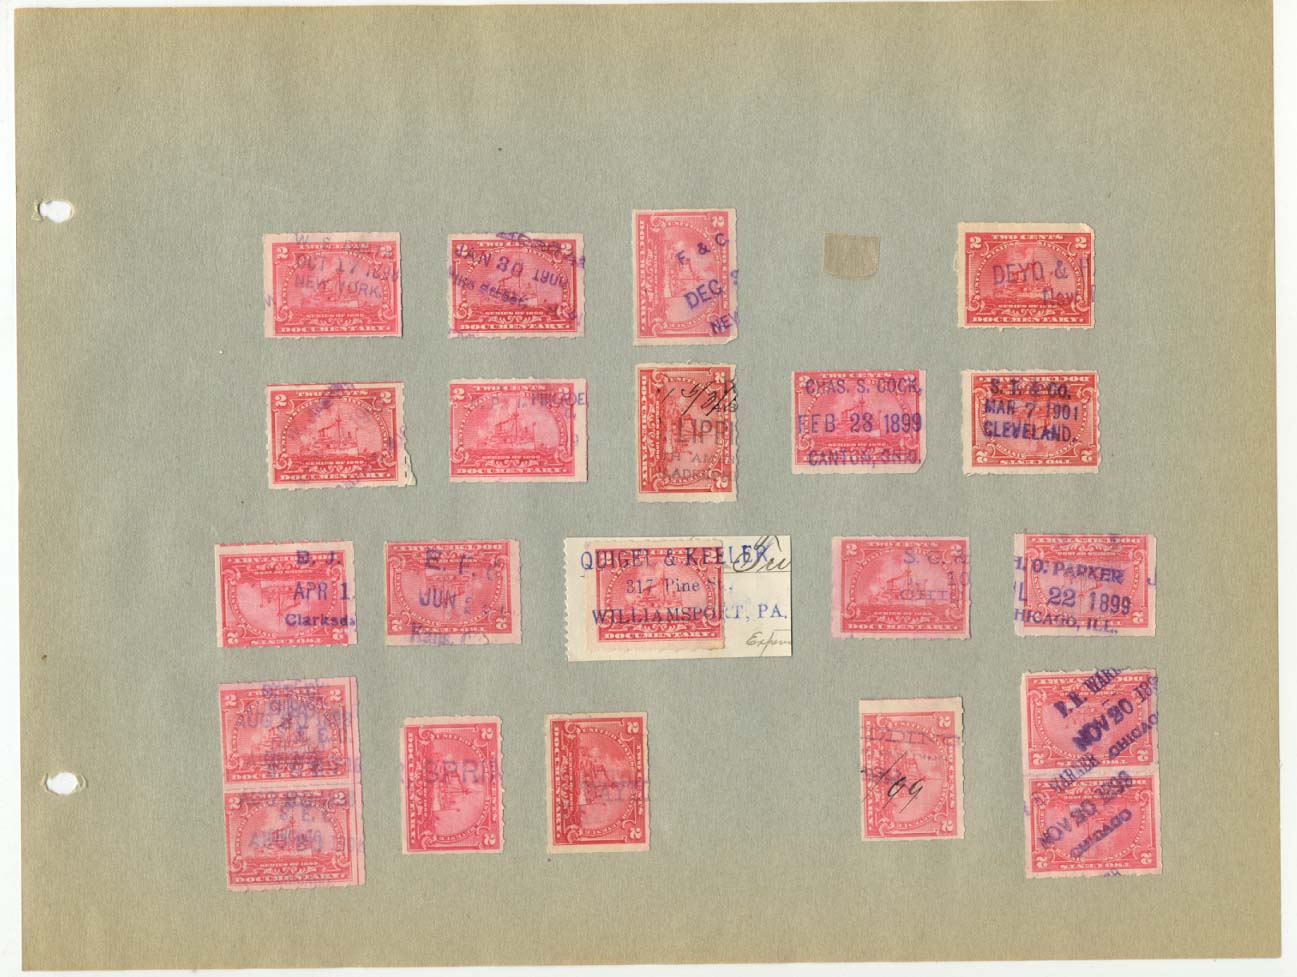 Extra Dated Revenue Stamps